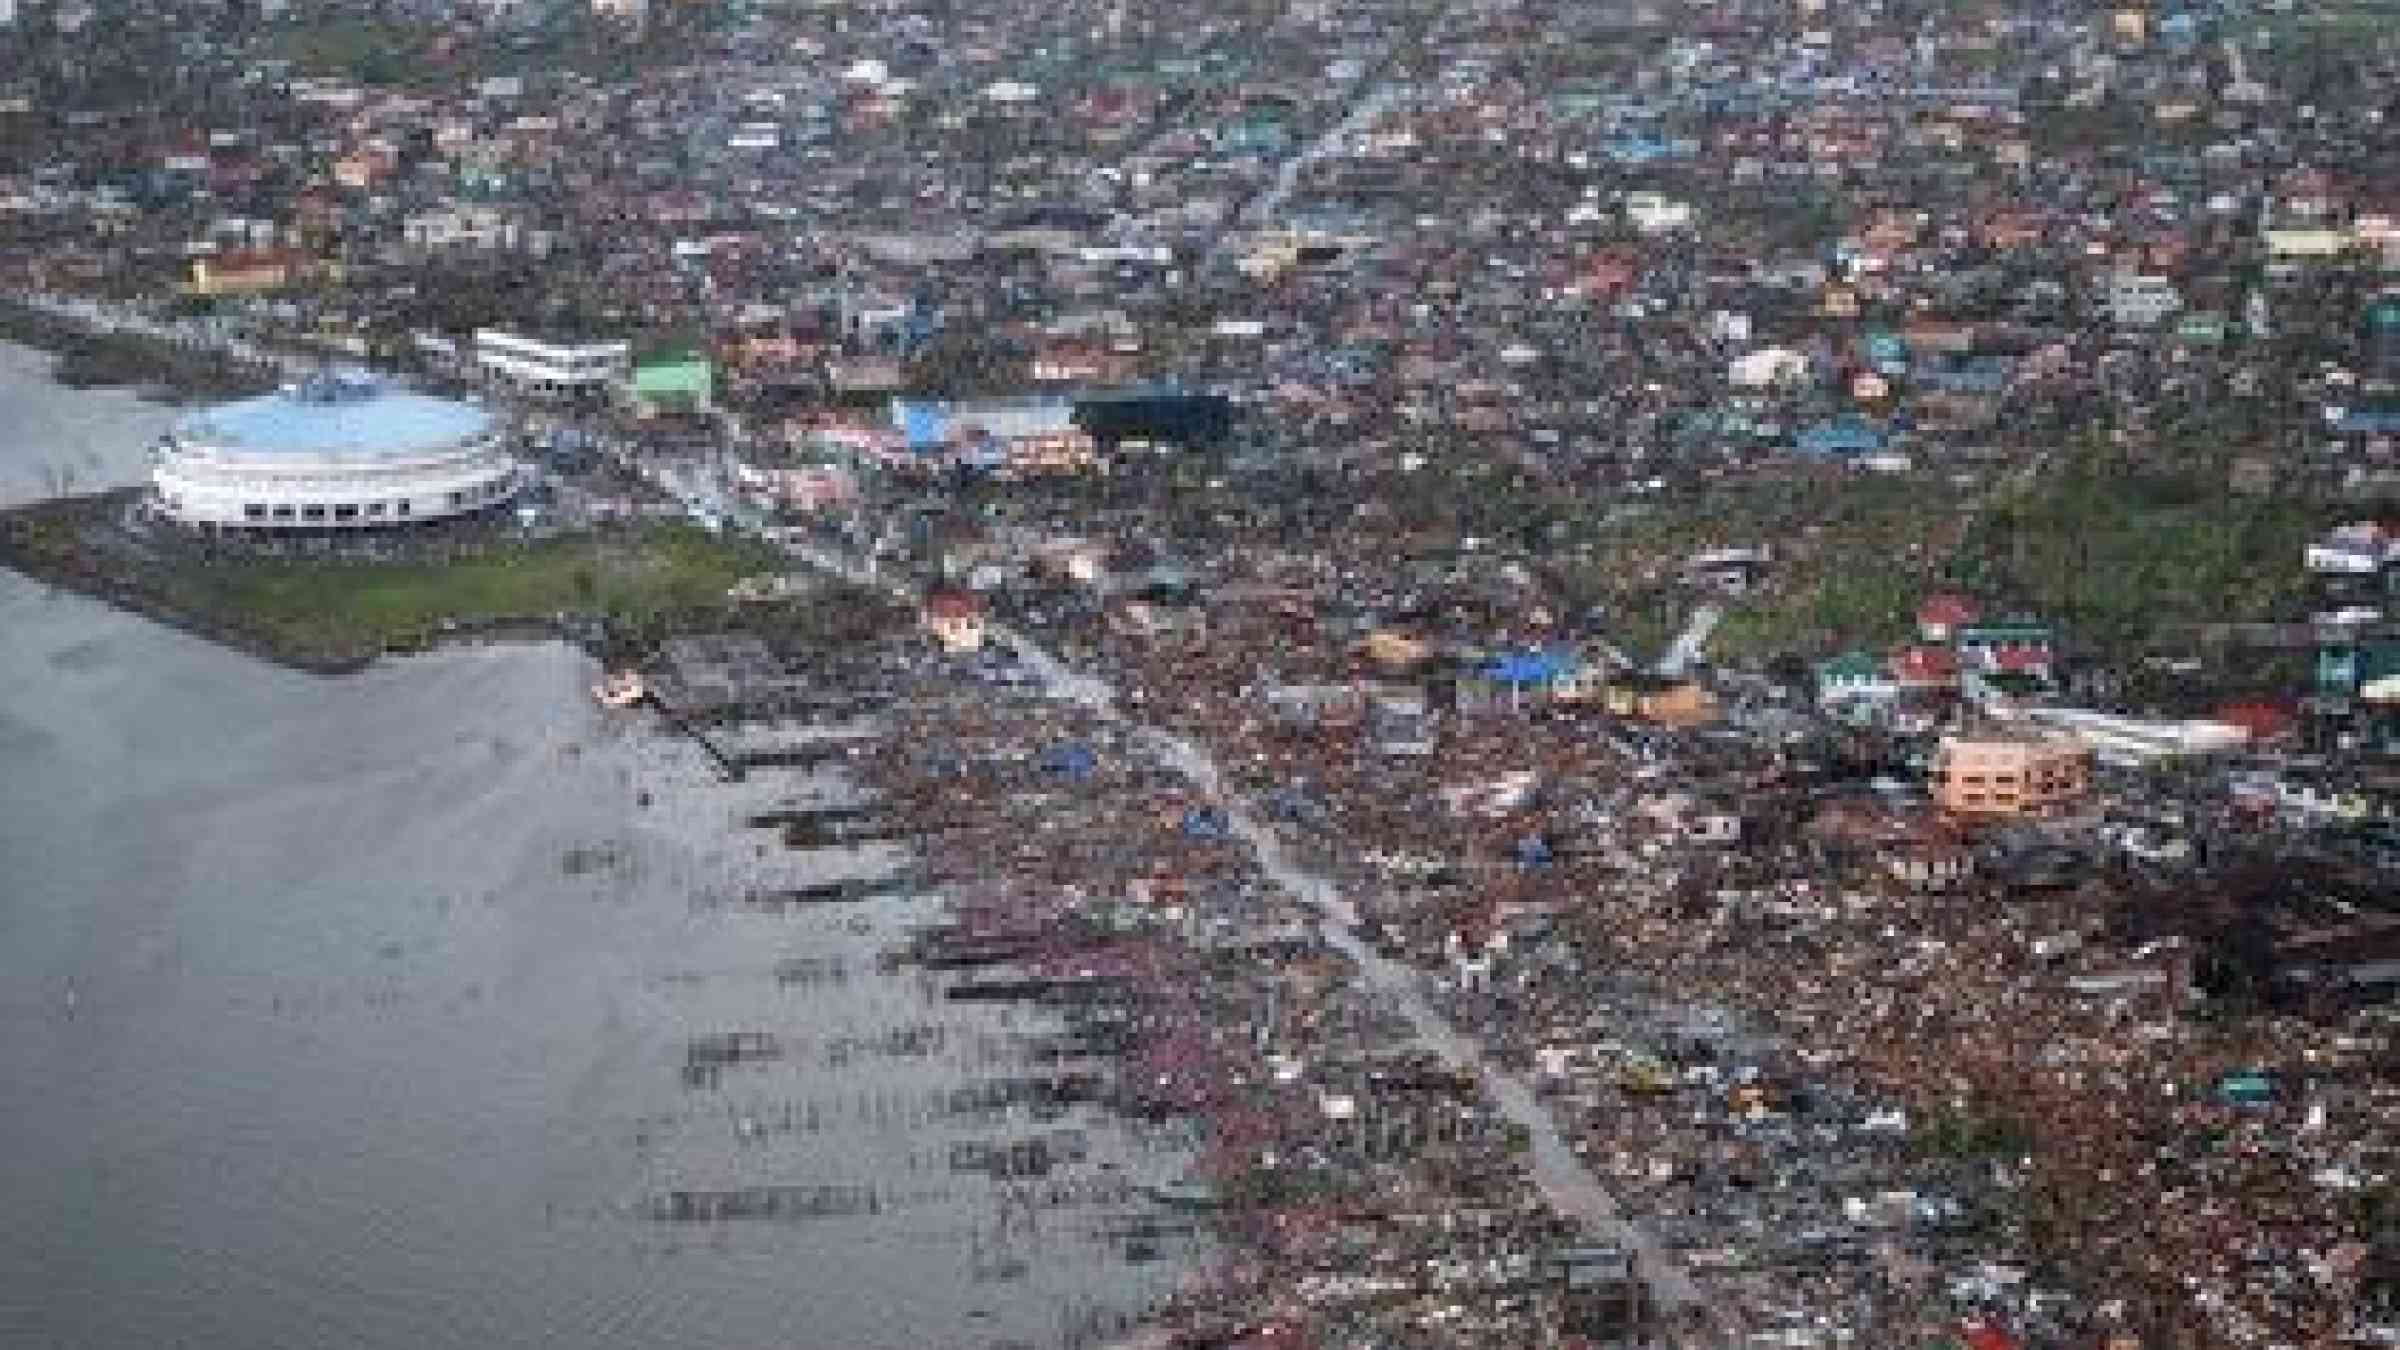 The devastation from super typhoon Haiyan has been both intense and widespread. </i>Photo credit: OCHA